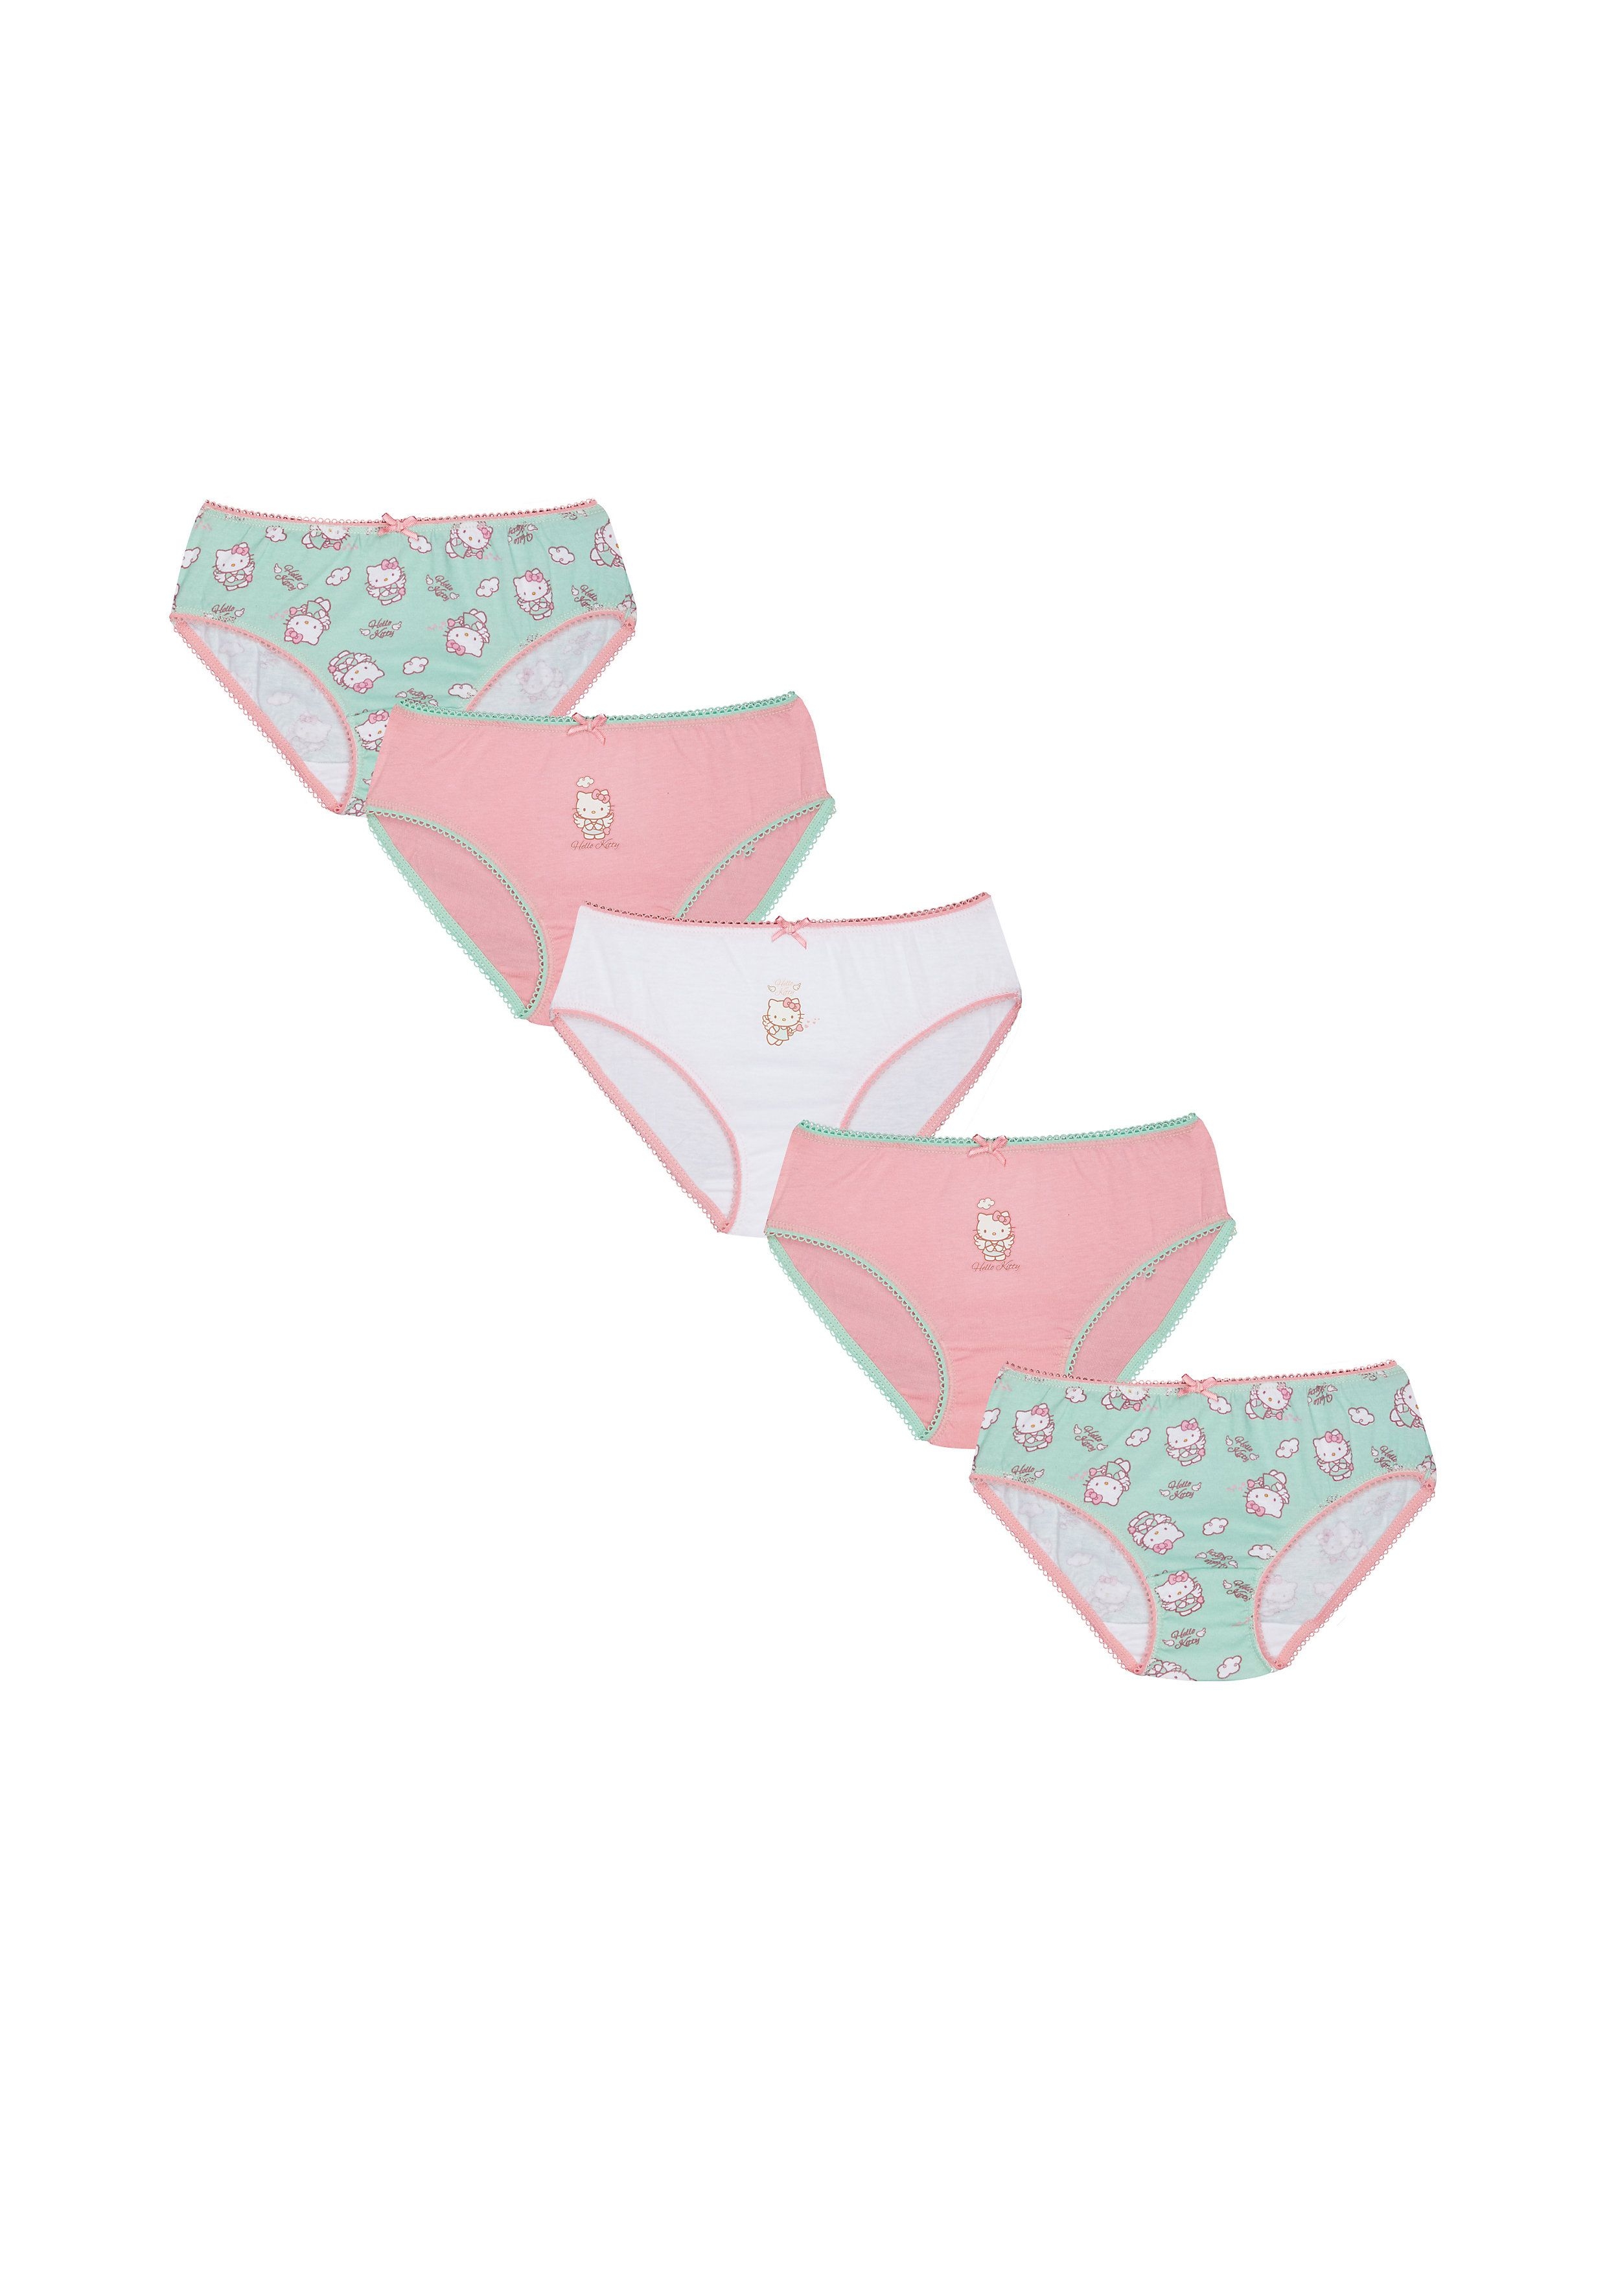 Mothercare | Girls Hello Kitty Briefs - 5 Pack - Multicolor